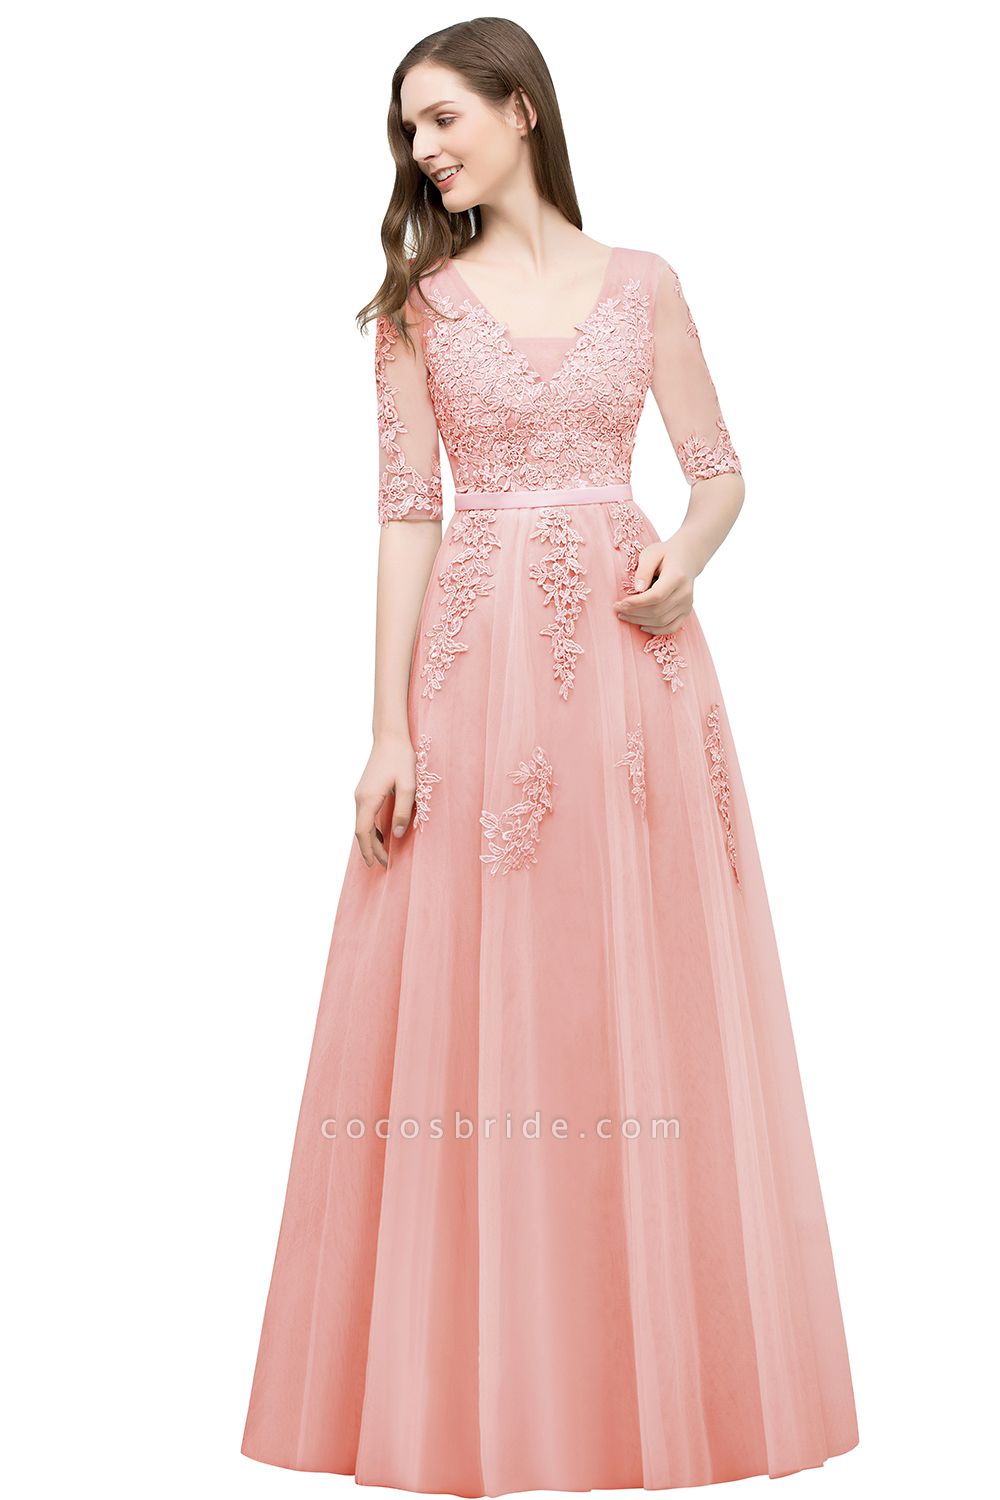 Glorious V-neck Tulle A-line Evening Dress